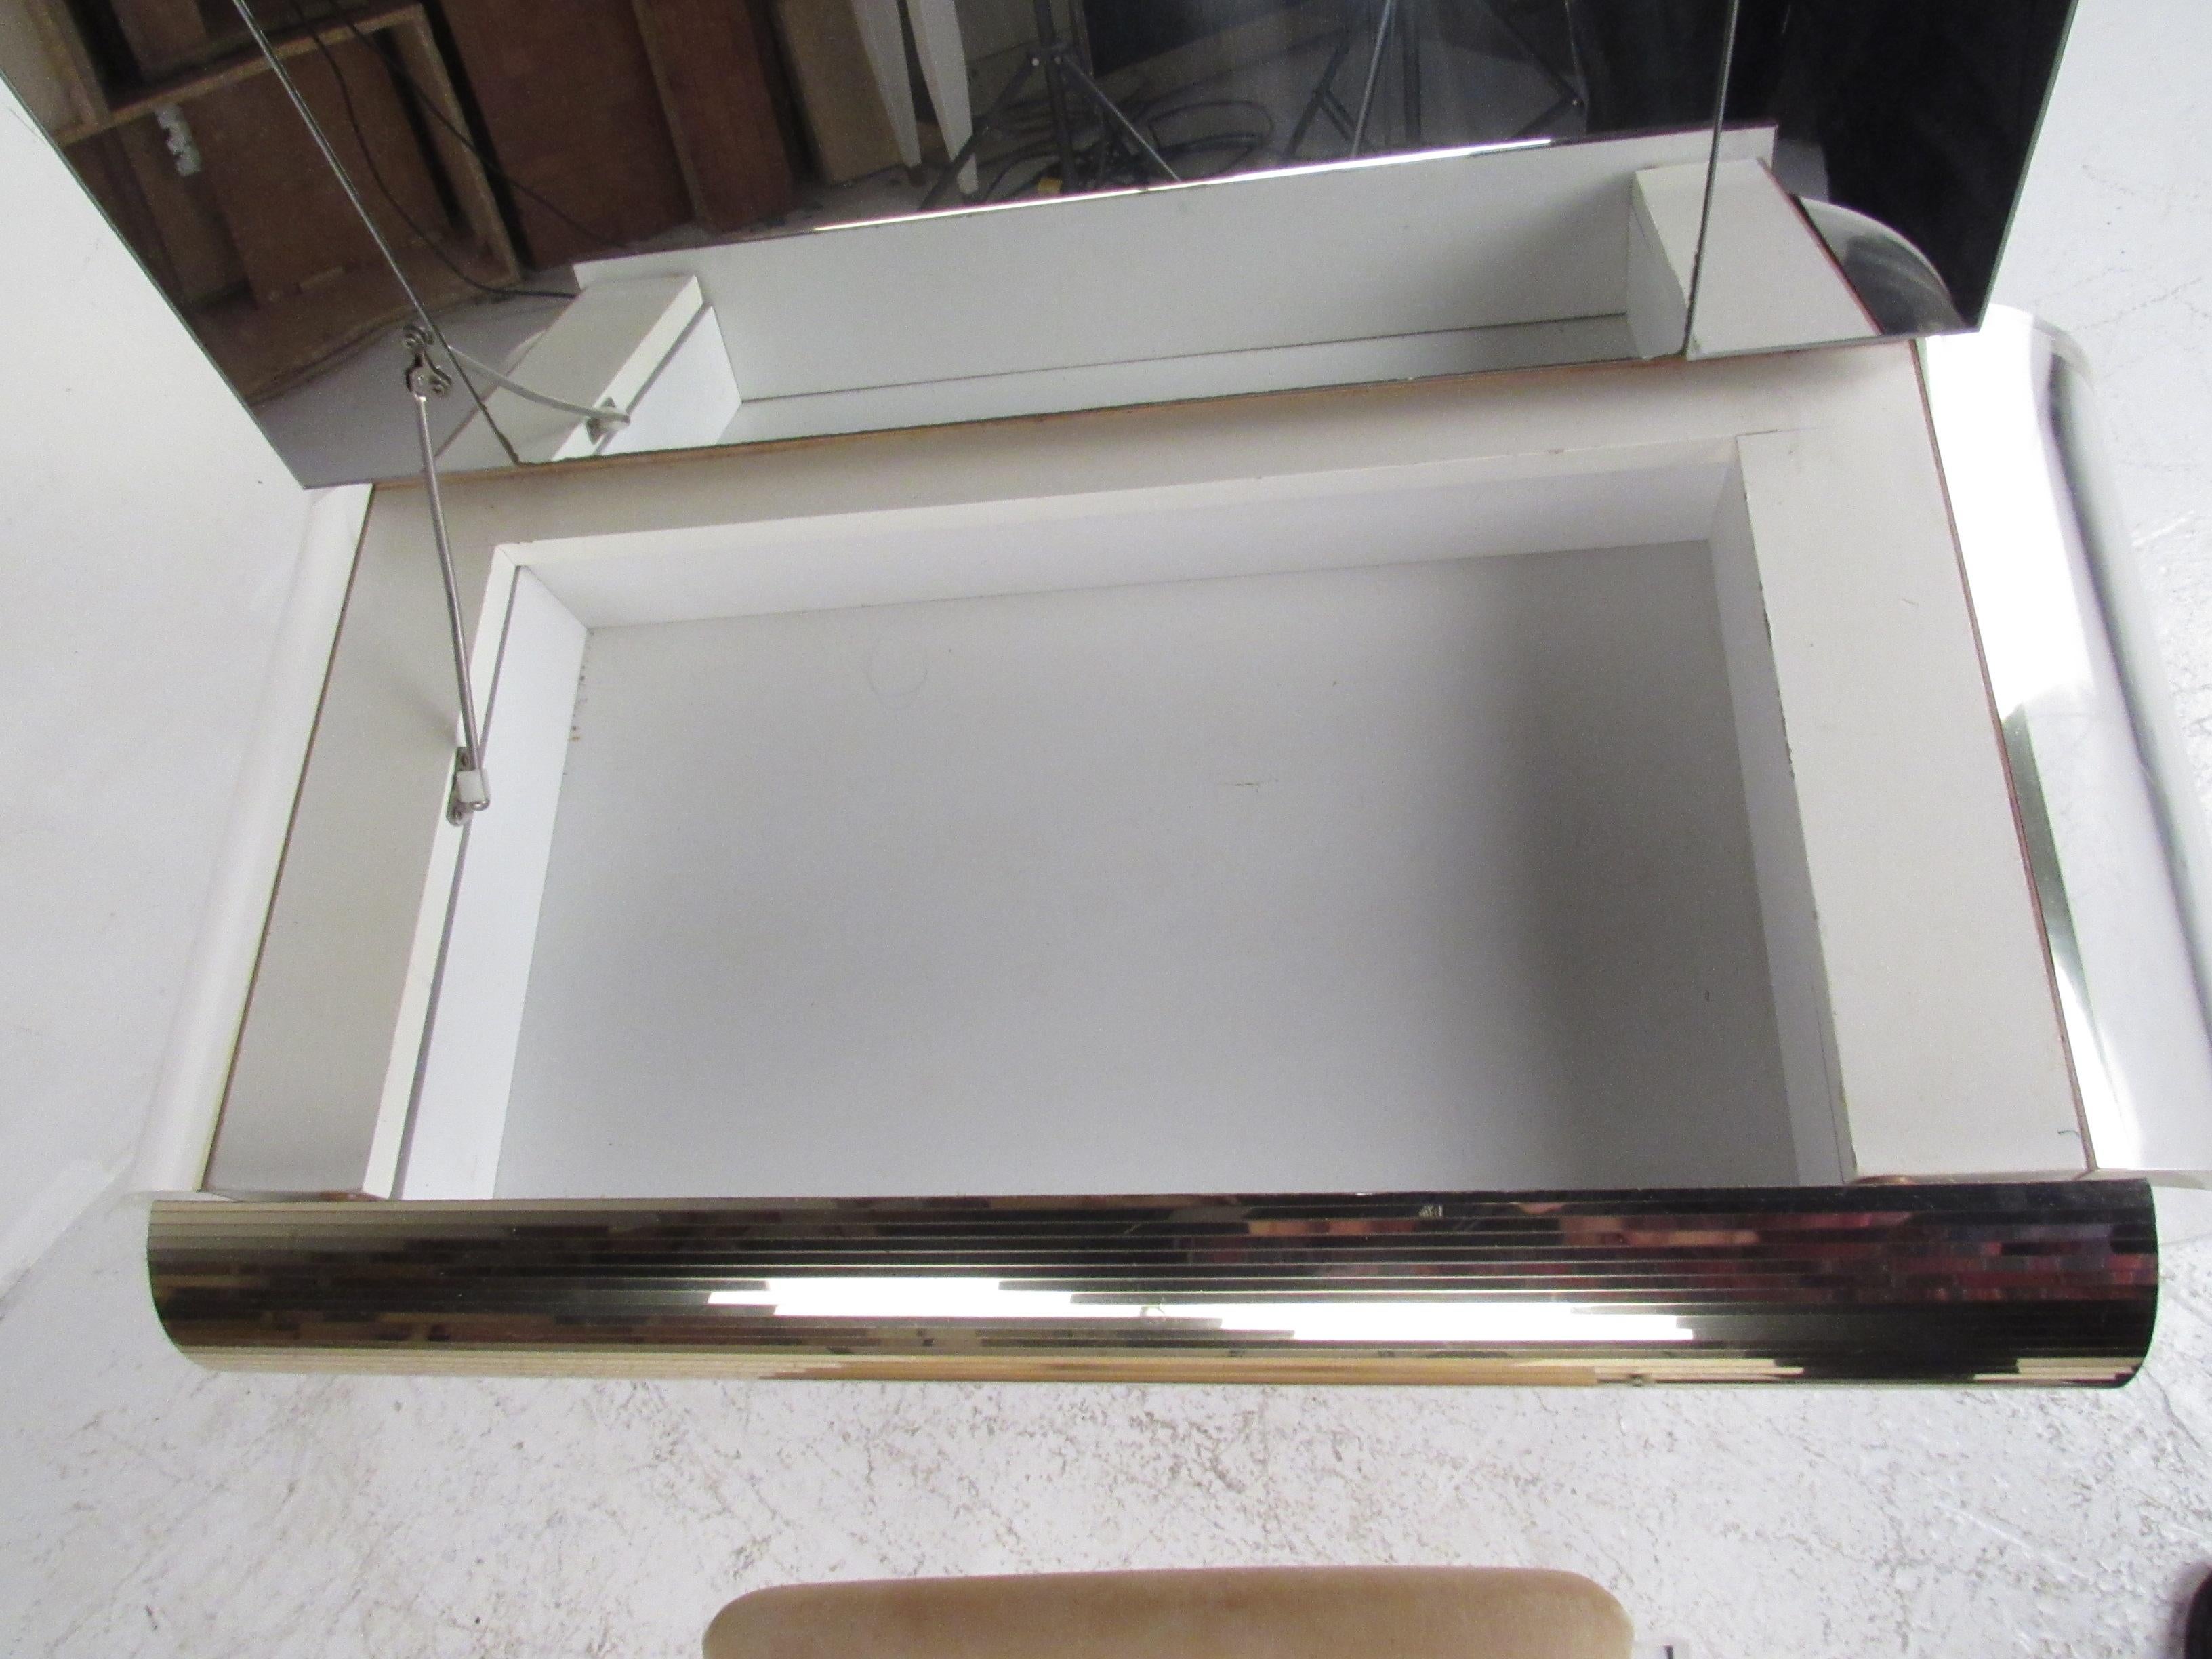 Late 20th Century Mid-Century Modern Lucite Vanity with a Mirrored Top by Hill Manufacturing